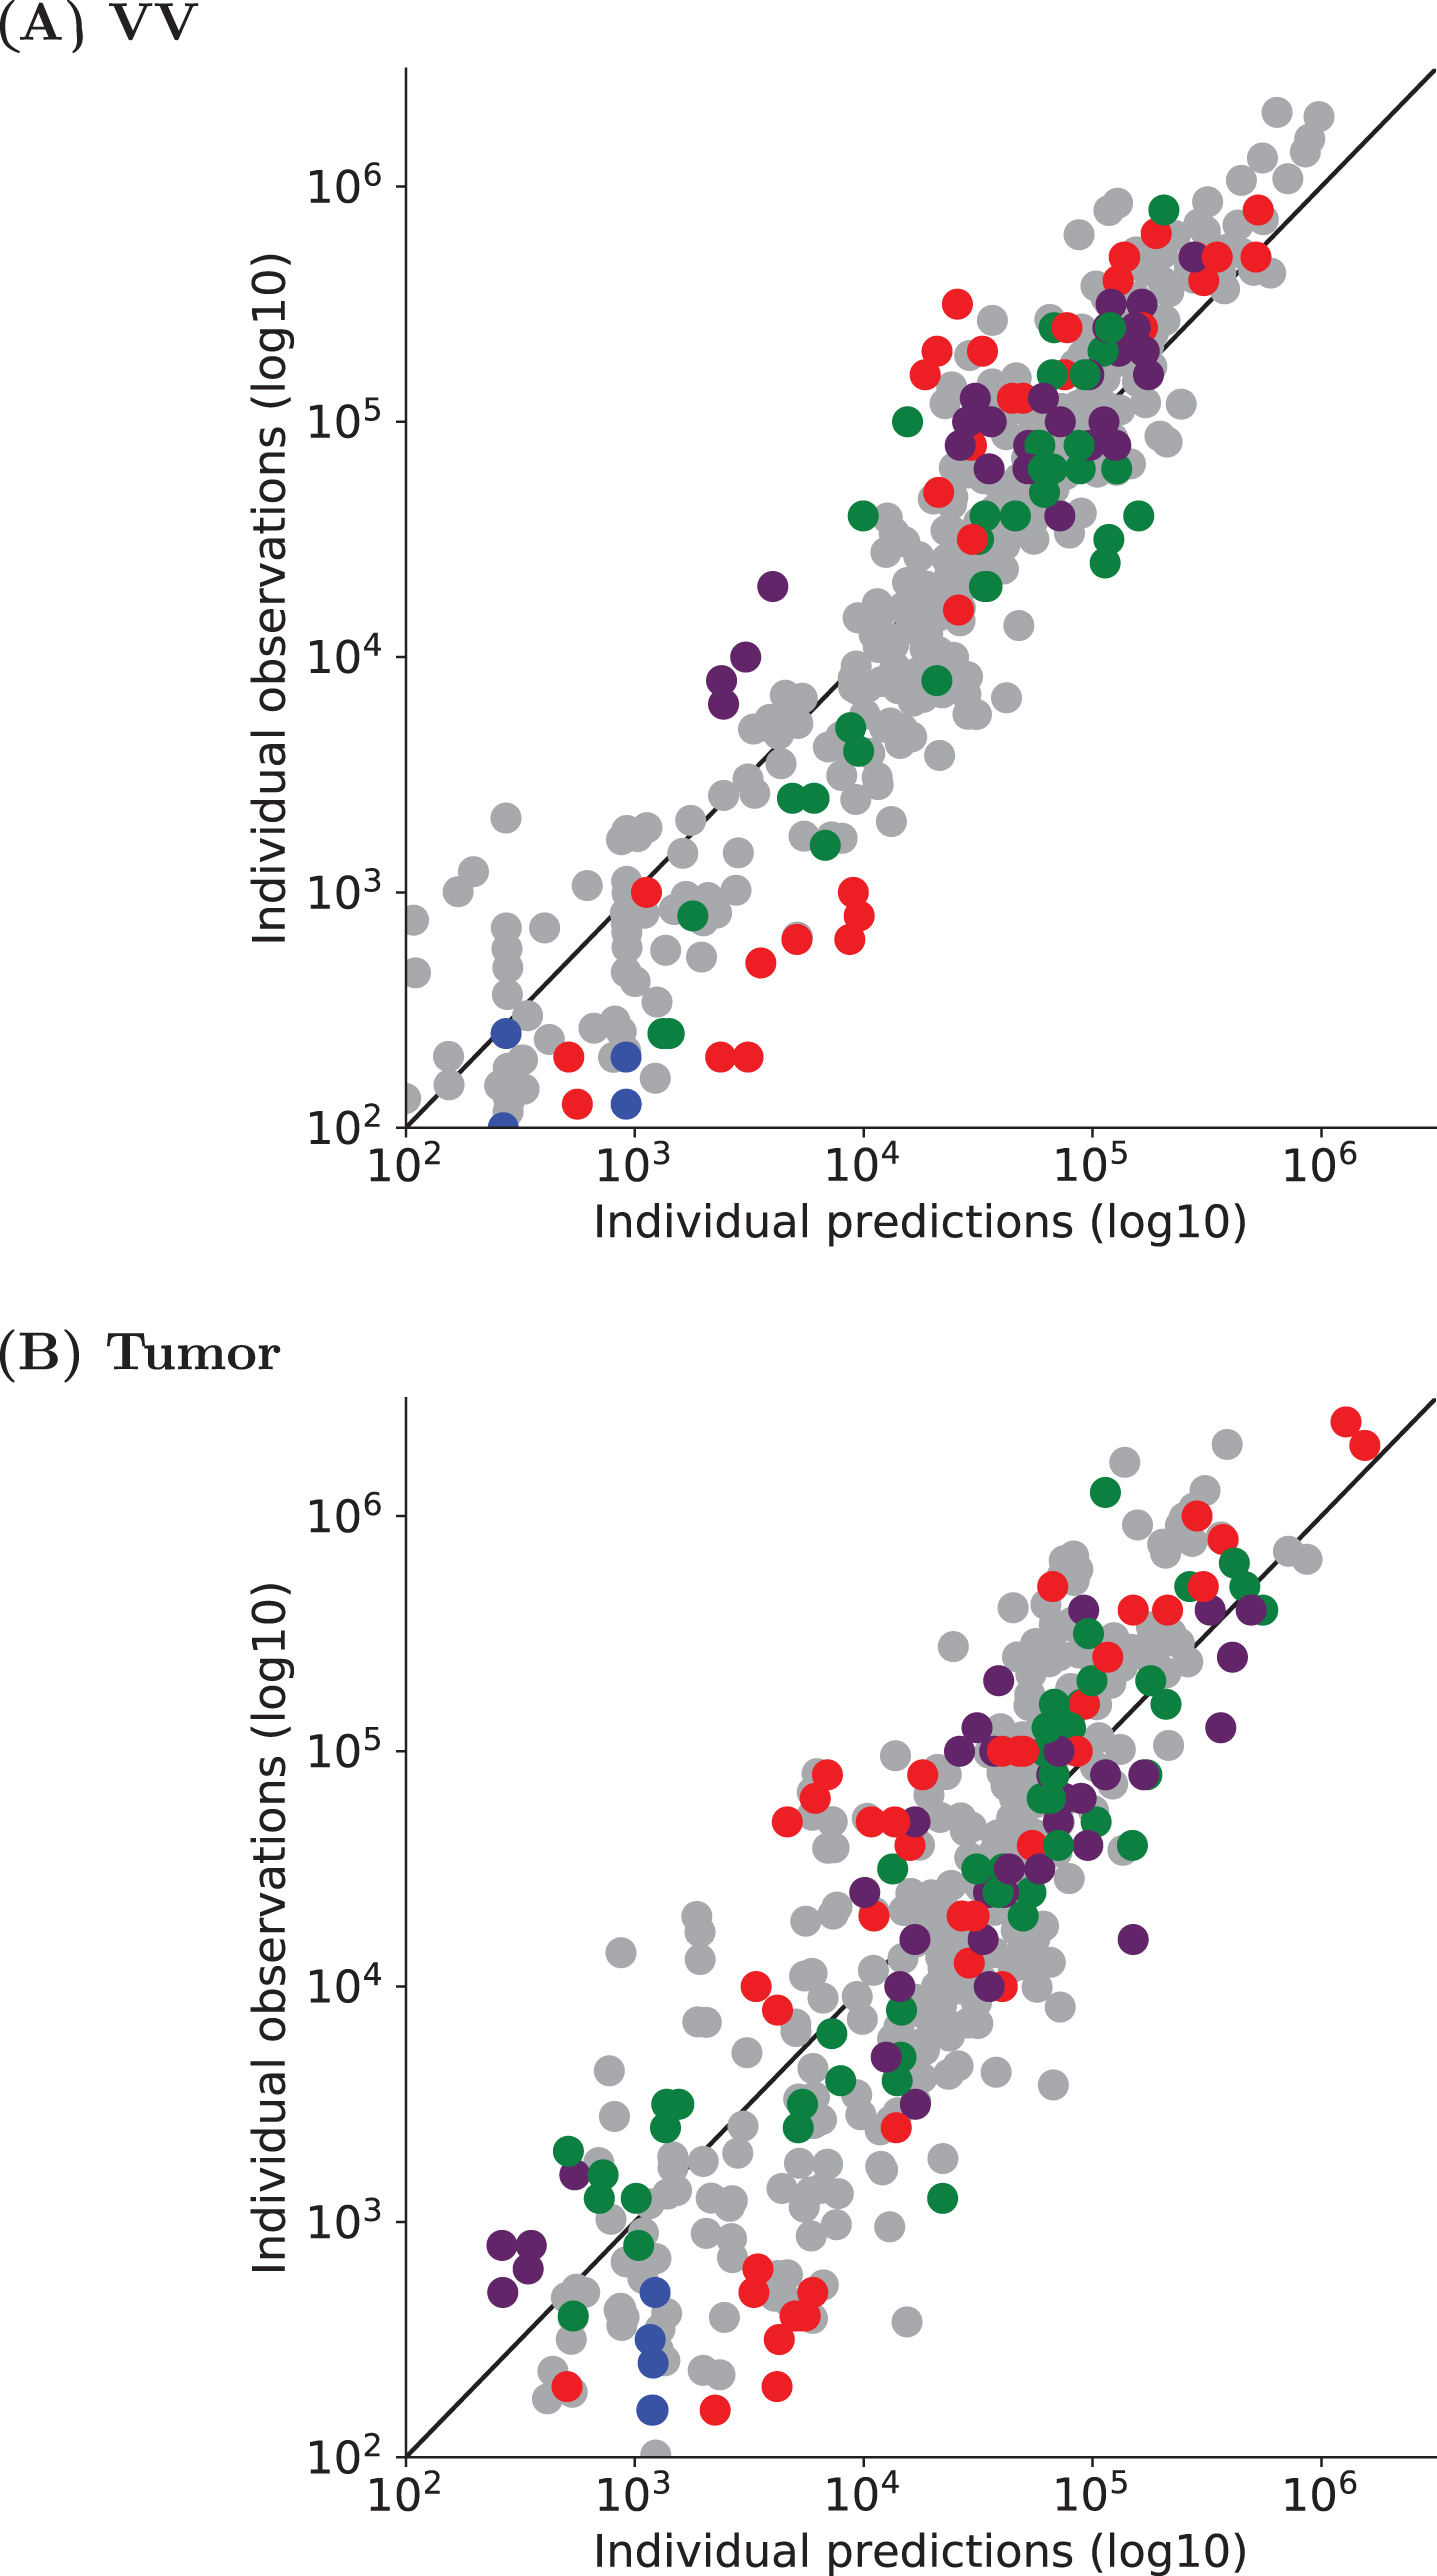 Observed vs estimated values of individual CD8 T cell counts for (A) VV data set 2 and (B) Tumor data set 2. Individual parameter values have been estimated with System (2) and population parameter values and distributions previously defined on VV and Tumor data set 1. In both figures, naive (blue), early effector (red), late effector (green), and memory (purple) cell counts are depicted. Grey points correspond to individual values from Figure 3A and Figure 5A. The black straight line is y = x.